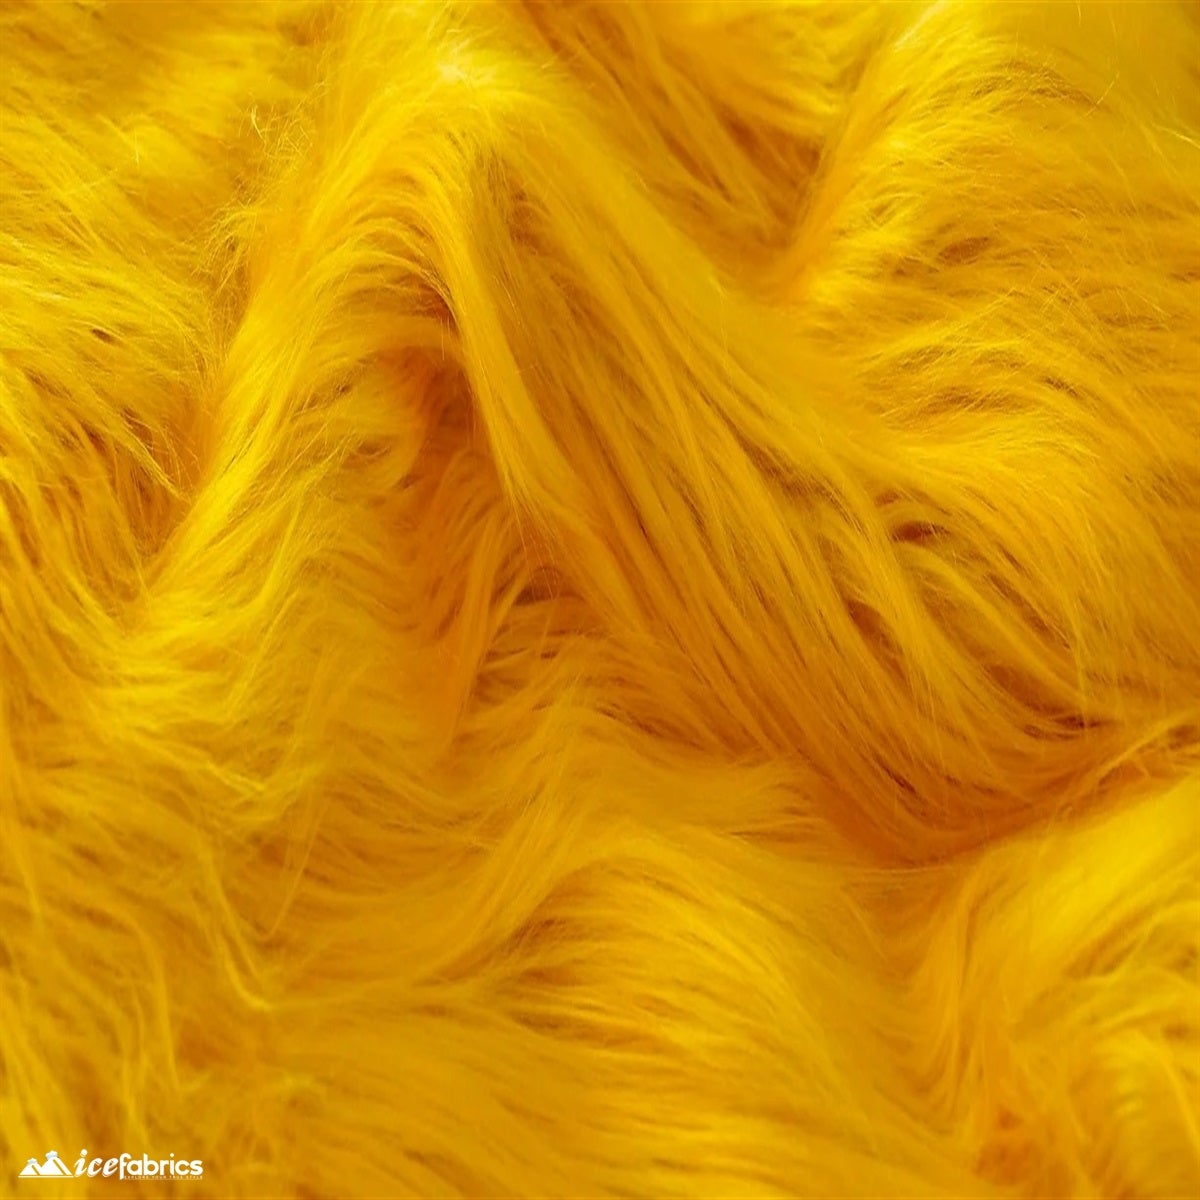 Mohair Faux Fur Fabric By The Roll (20 Yards) 4 Inch PileICE FABRICSICE FABRICSGoldBy The Roll (60" Wide)Mohair Faux Fur Fabric By The Roll (20 Yards) 4 Inch Pile ICE FABRICS